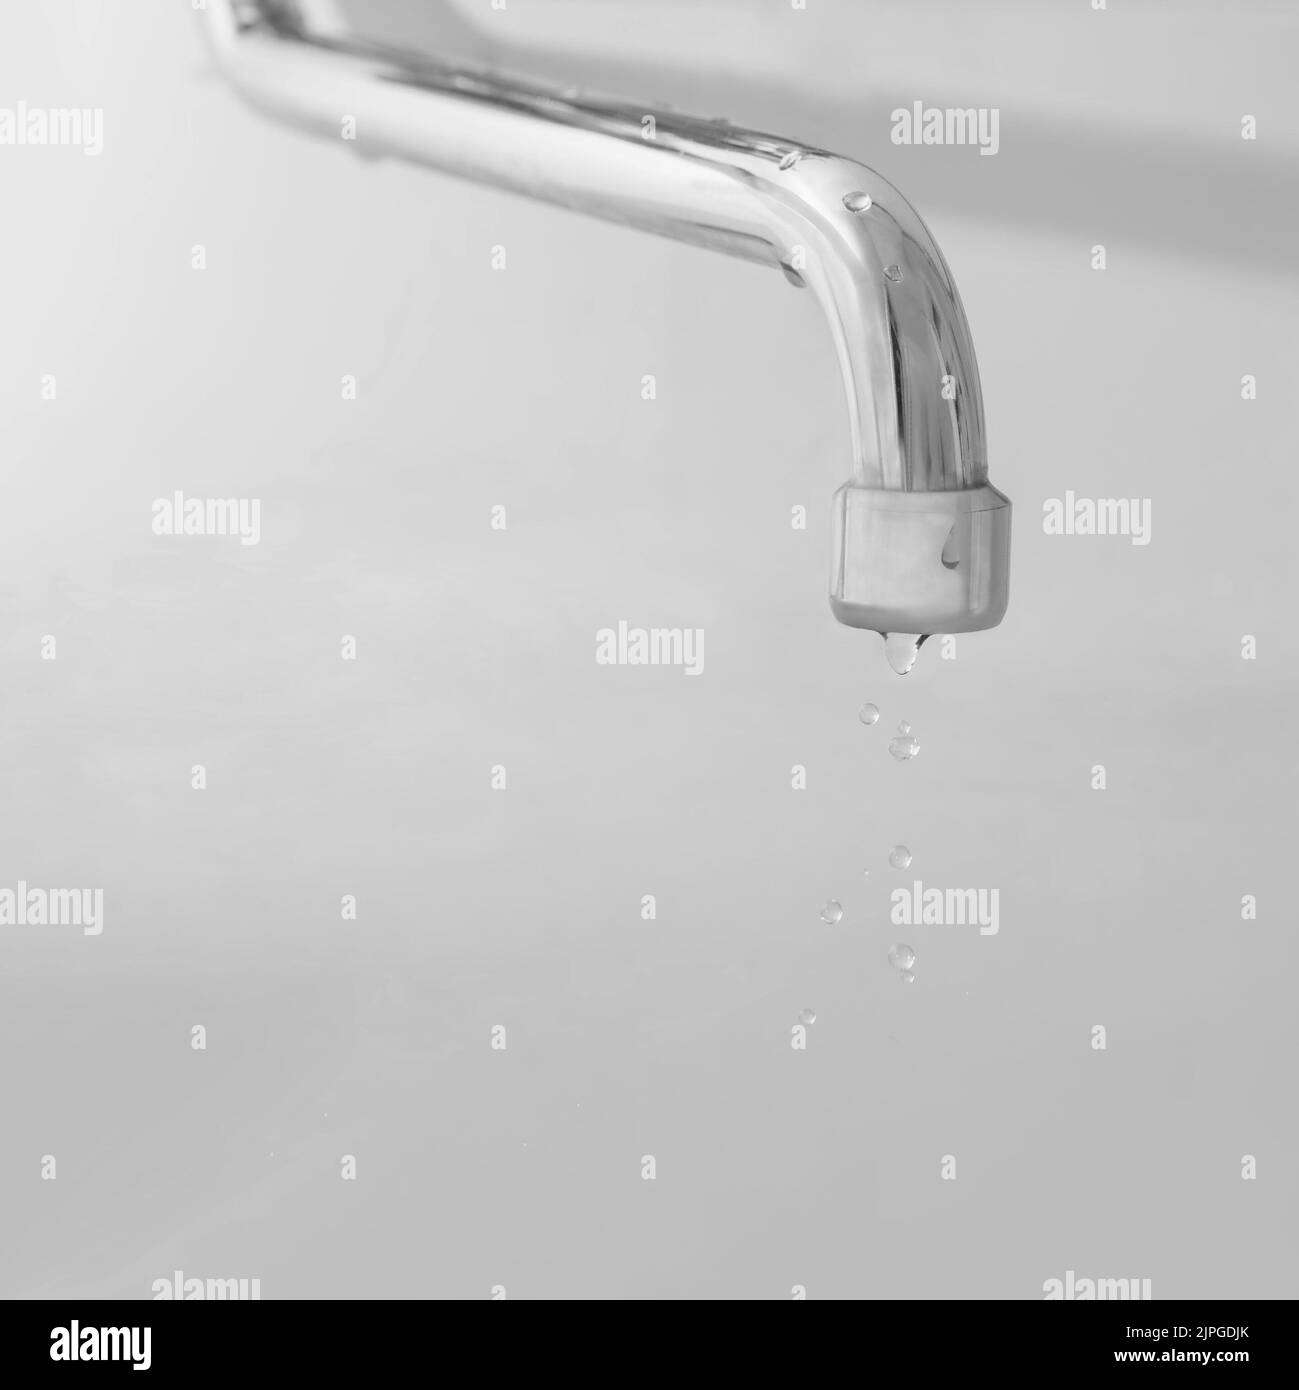 Water flowing from the faucet. Water leaking, saving concept. Stock Photo